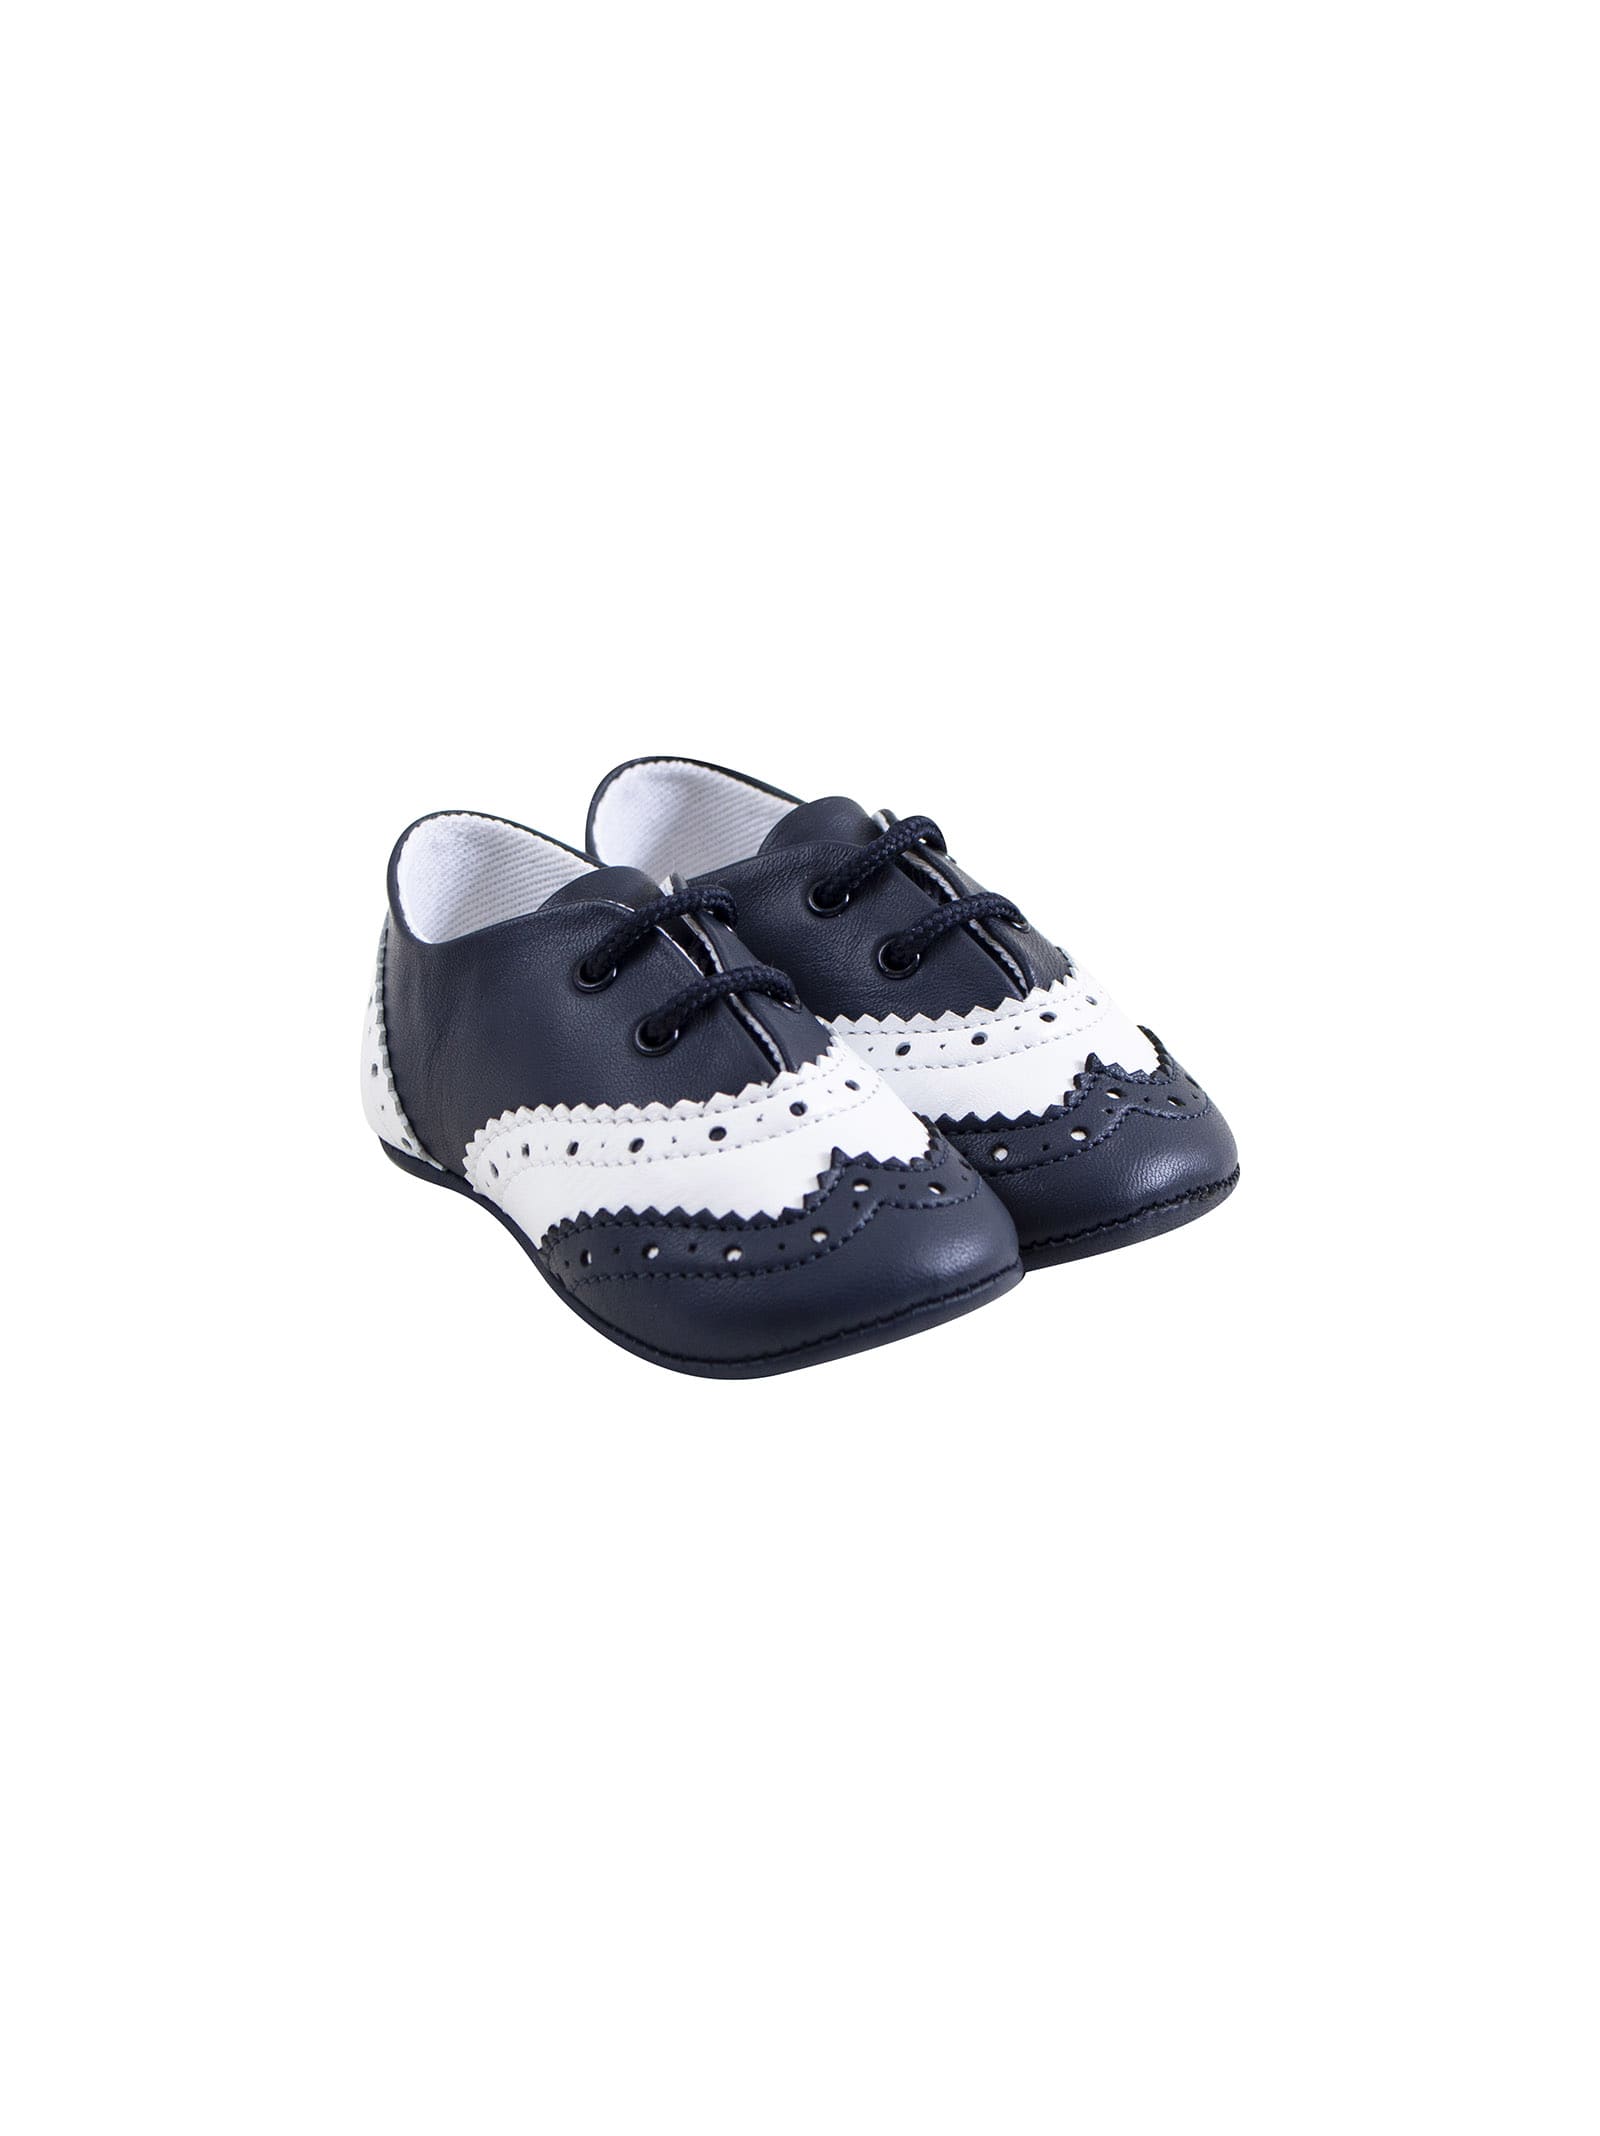 baby armani shoes